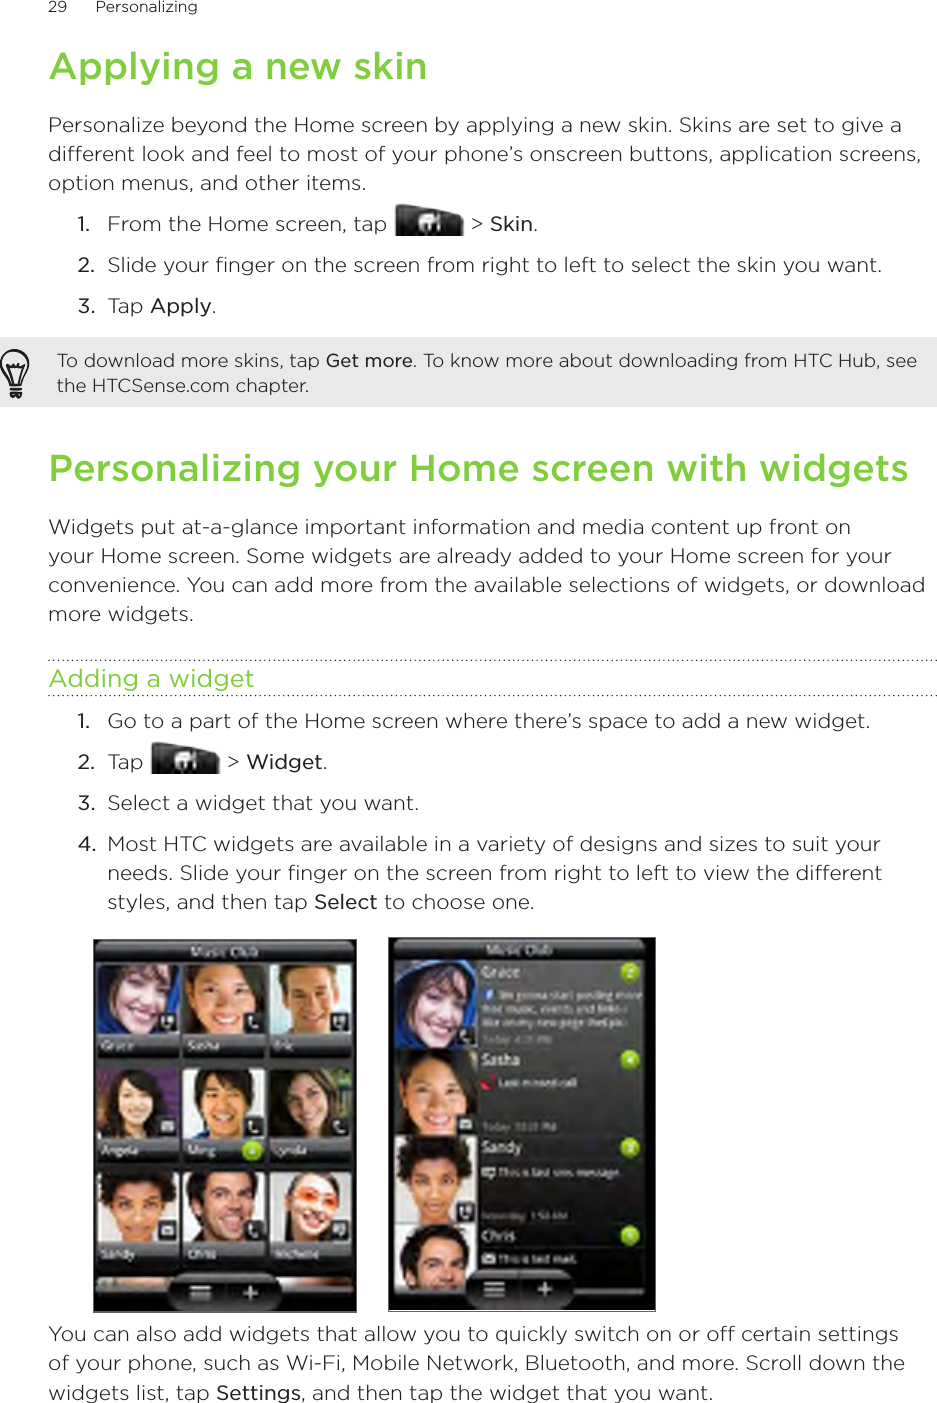 29      Personalizing      Applying a new skinPersonalize beyond the Home screen by applying a new skin. Skins are set to give a different look and feel to most of your phone’s onscreen buttons, application screens, option menus, and other items.From the Home screen, tap   &gt; Skin.Slide your finger on the screen from right to left to select the skin you want.3.  Tap Apply.To download more skins, tap Get more. To know more about downloading from HTC Hub, see the HTCSense.com chapter.Personalizing your Home screen with widgetsWidgets put at-a-glance important information and media content up front on your Home screen. Some widgets are already added to your Home screen for your convenience. You can add more from the available selections of widgets, or download more widgets.Adding a widgetGo to a part of the Home screen where there’s space to add a new widget.Tap   &gt; Widget.Select a widget that you want.Most HTC widgets are available in a variety of designs and sizes to suit your needs. Slide your finger on the screen from right to left to view the different styles, and then tap Select to choose one.You can also add widgets that allow you to quickly switch on or off certain settings of your phone, such as Wi-Fi, Mobile Network, Bluetooth, and more. Scroll down the widgets list, tap Settings, and then tap the widget that you want.1.2.1.2.3.4.